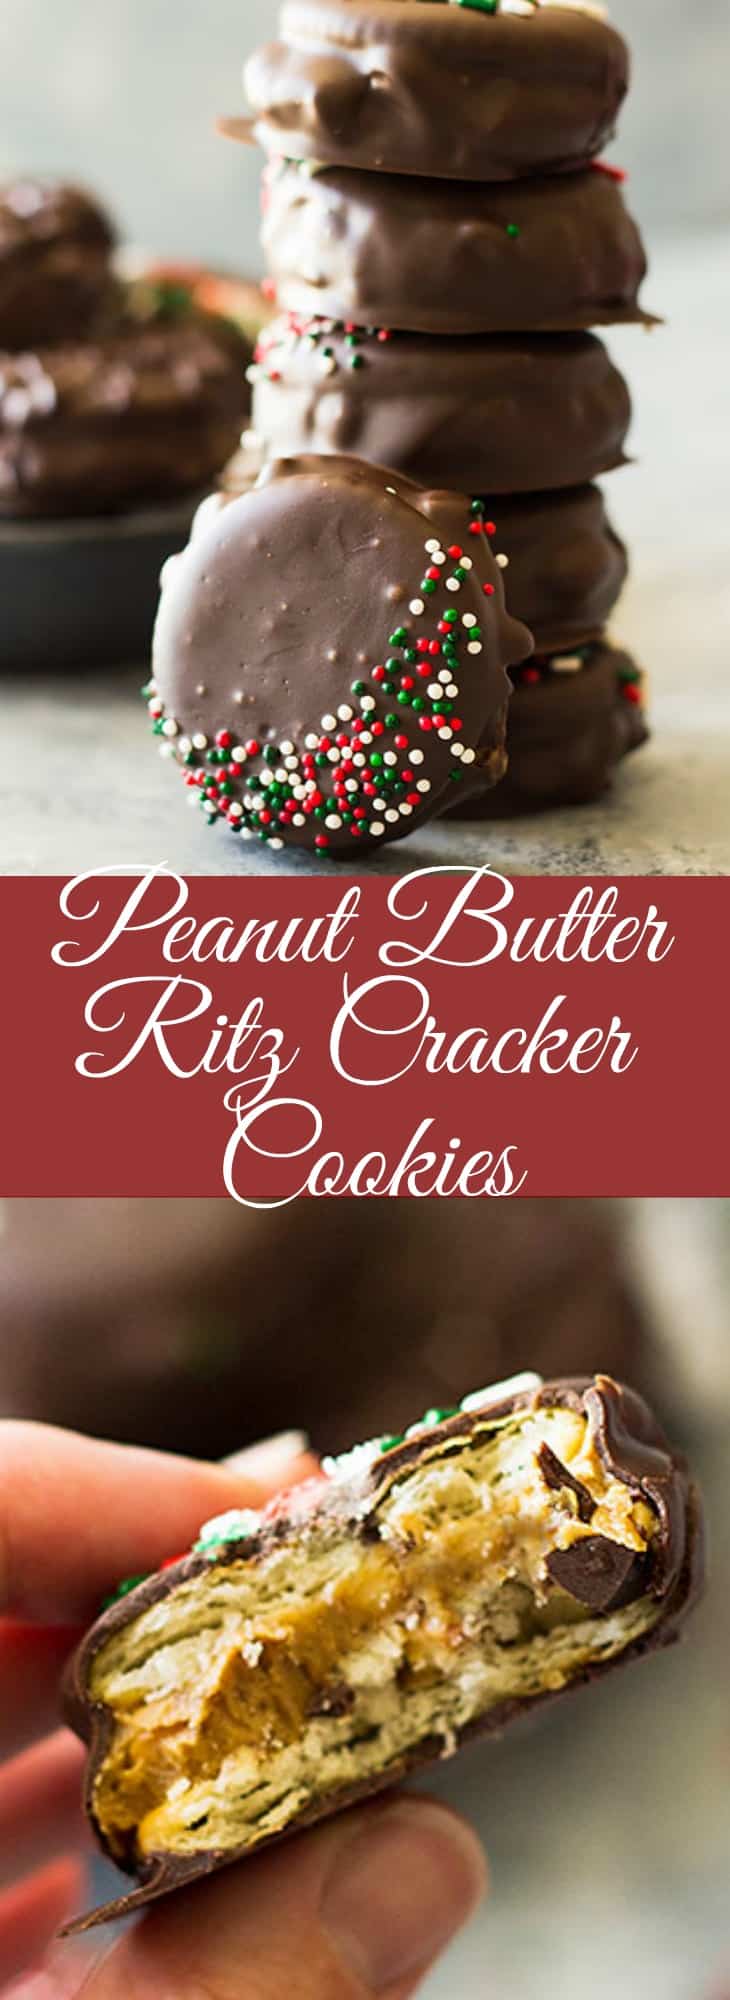 These Peanut Butter Ritz Cracker Cookies are extremely easy to make, only require 3 ingredients and are very addicting! | www.countrysidecravings.com